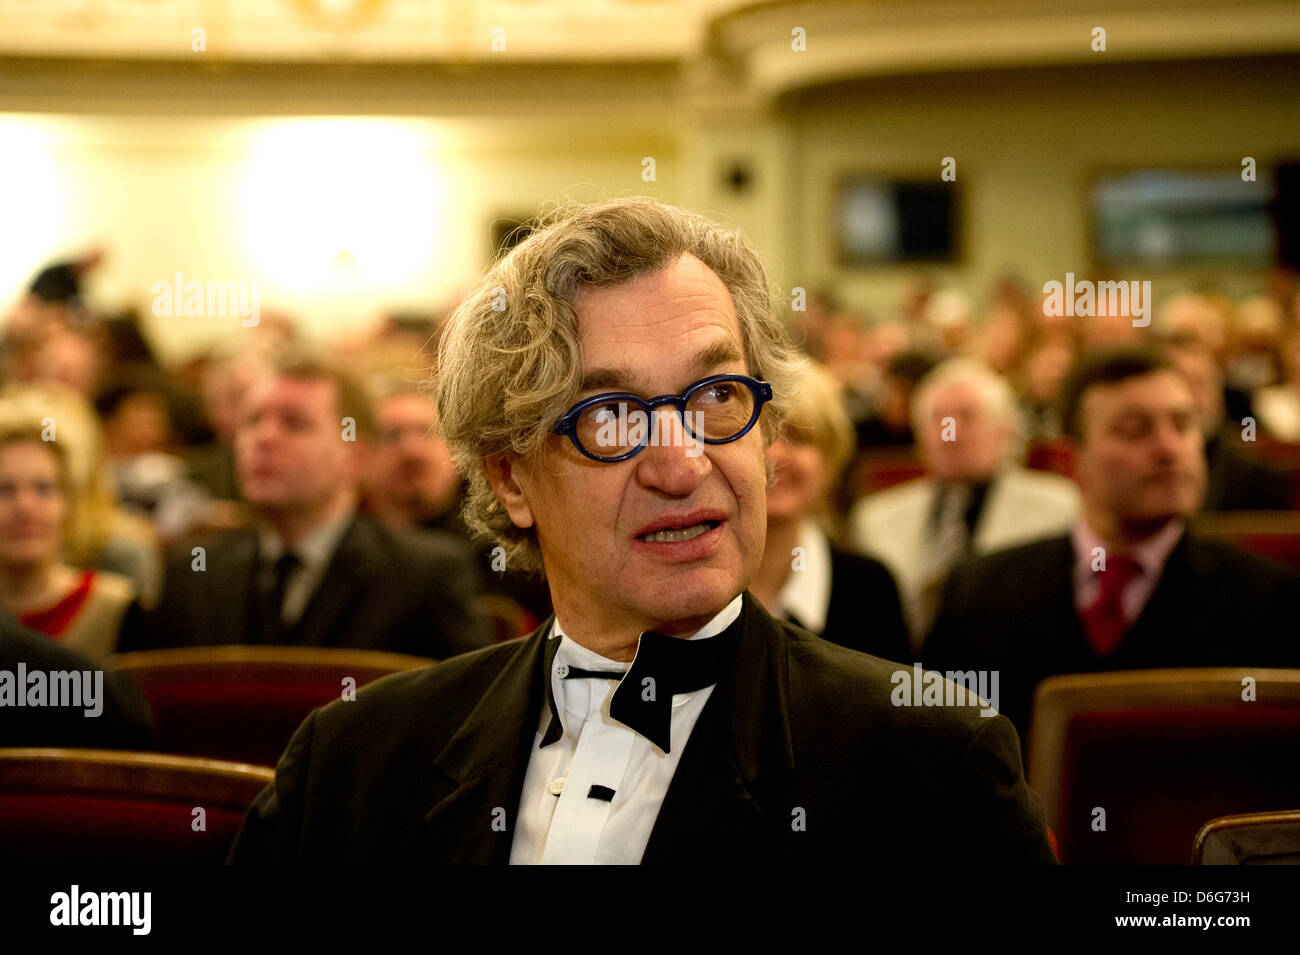 German director Wim Wenders attend the award ceremony of the gives the 3rd international peace prize, the Dresden Prize, to American documentary photographer James Nachtwey at the Semper Opera in Dresden, Germany, 11 February 2012. Photo: ARNO BURGI Stock Photo